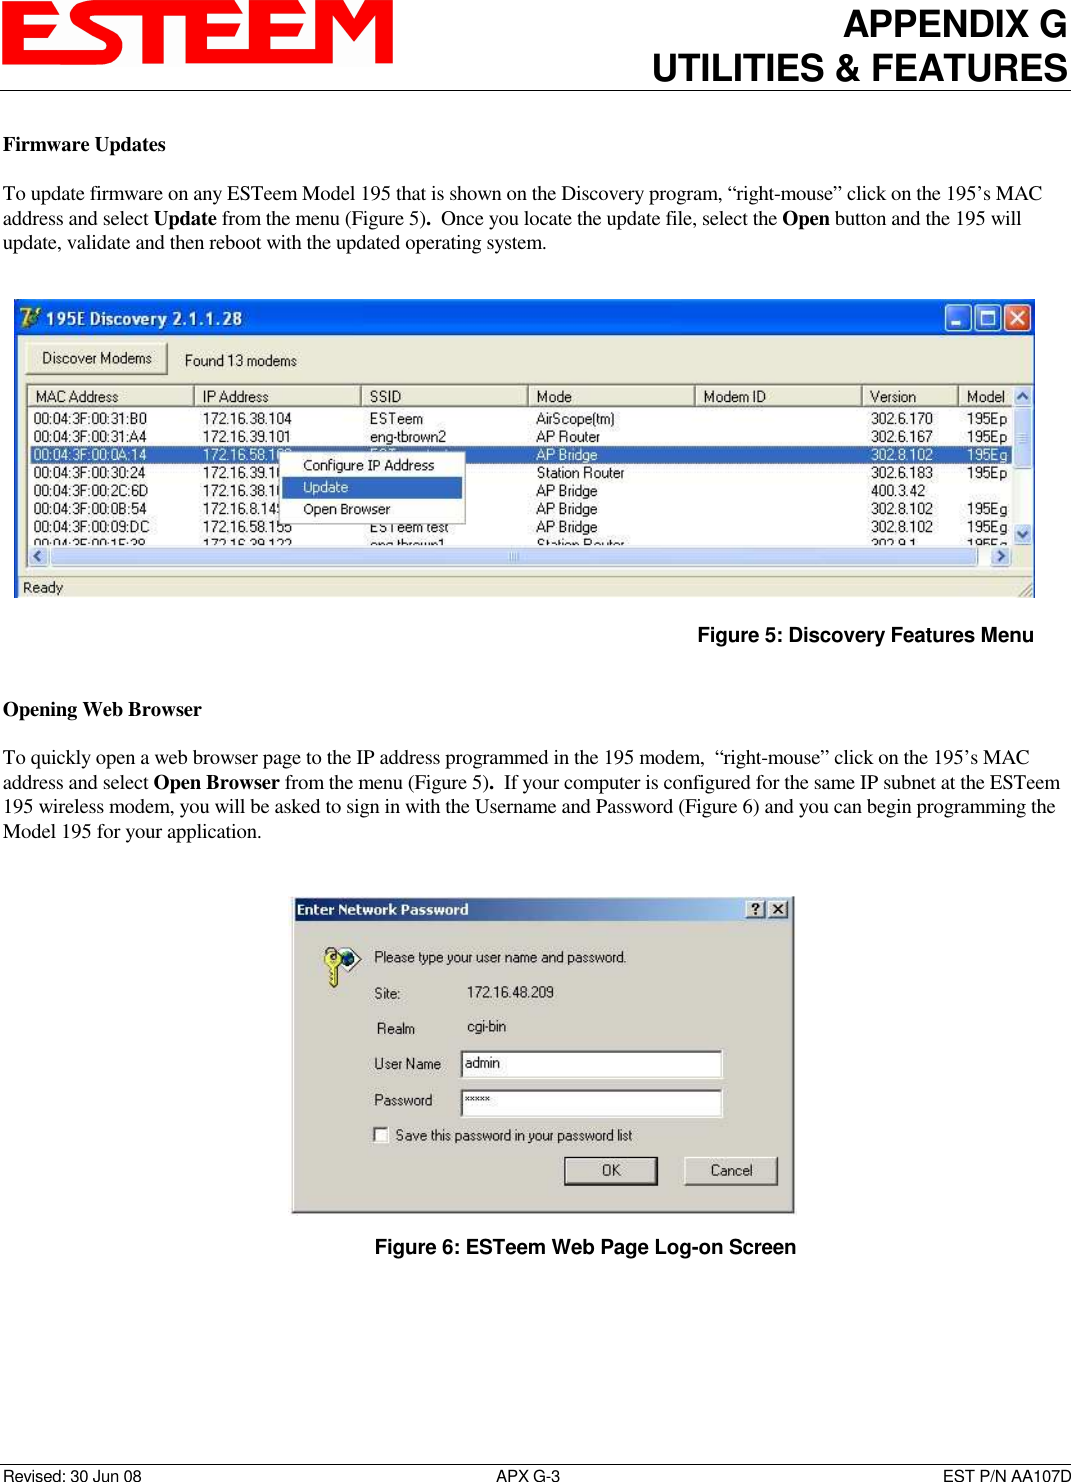 APPENDIX G UTILITIES &amp; FEATURES   Revised: 30 Jun 08  APX G-3  EST P/N AA107D Firmware Updates  To update firmware on any ESTeem Model 195 that is shown on the Discovery program, “right-mouse” click on the 195’s MAC address and select Update from the menu (Figure 5).  Once you locate the update file, select the Open button and the 195 will update, validate and then reboot with the updated operating system.   Opening Web Browser  To quickly open a web browser page to the IP address programmed in the 195 modem,  “right-mouse” click on the 195’s MAC address and select Open Browser from the menu (Figure 5).  If your computer is configured for the same IP subnet at the ESTeem 195 wireless modem, you will be asked to sign in with the Username and Password (Figure 6) and you can begin programming the Model 195 for your application.     Figure 5: Discovery Features Menu    Figure 6: ESTeem Web Page Log-on Screen 